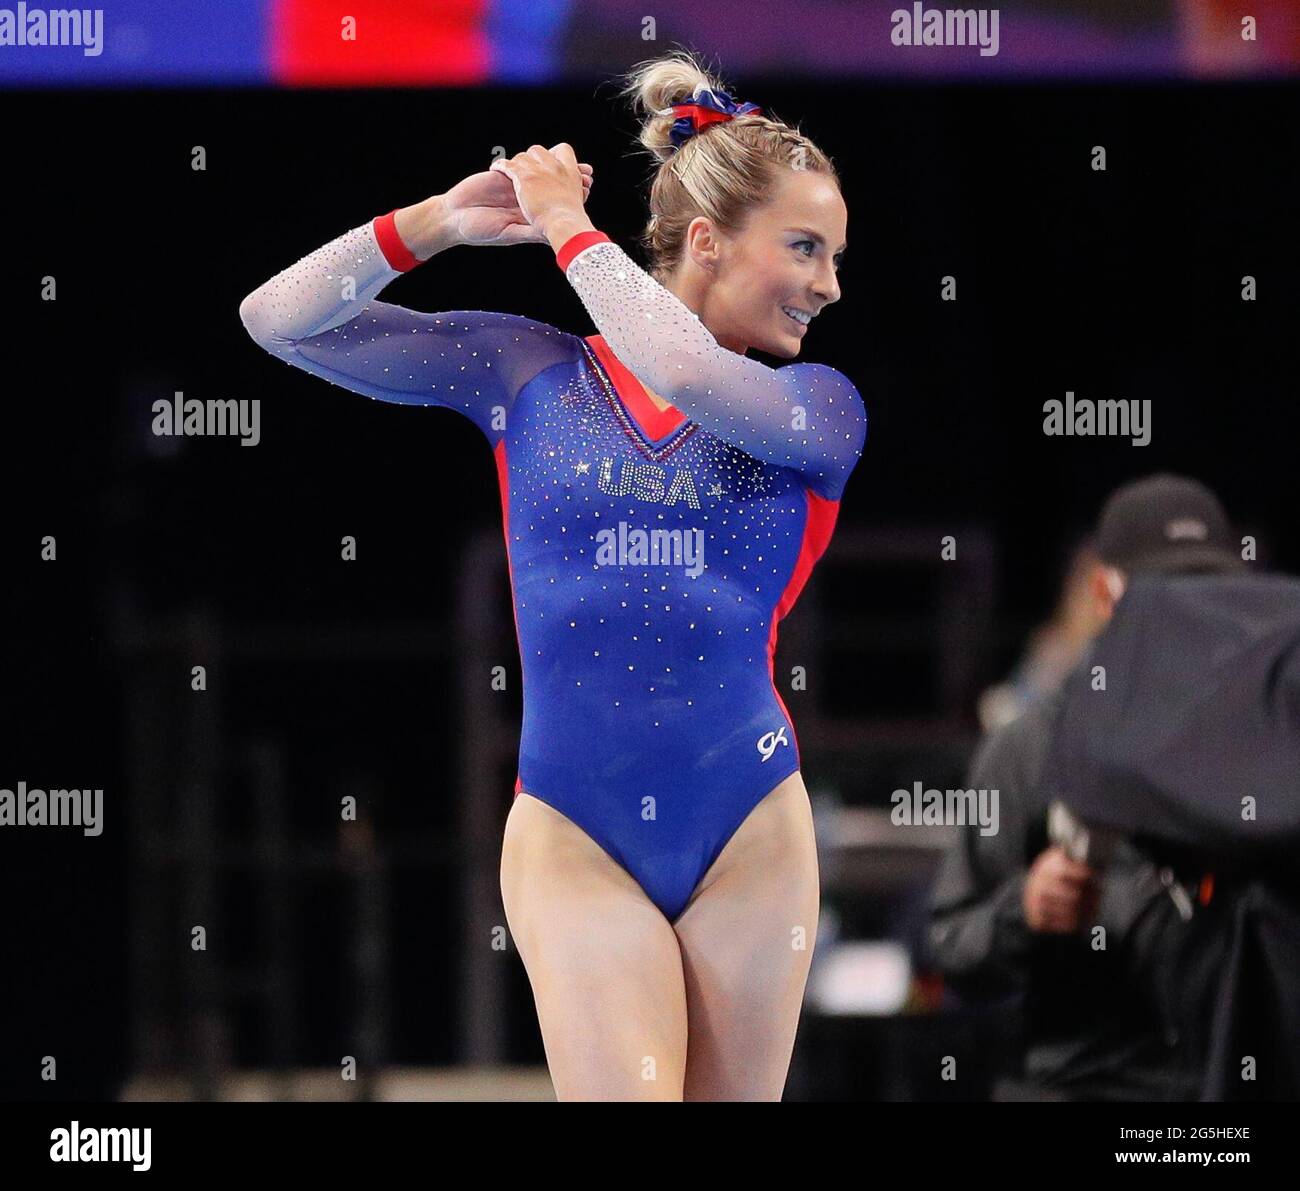 St Louis, USA. June 27, 2021: MyKayla Skinner finishes her floor routine during Day 2 of the 2021 U.S. Women's Gymnastics Olympic Team Trials at the Dome at America's Center in St. Louis, MO. Kyle Okita/CSM Credit: Cal Sport Media/Alamy Live News Stock Photo